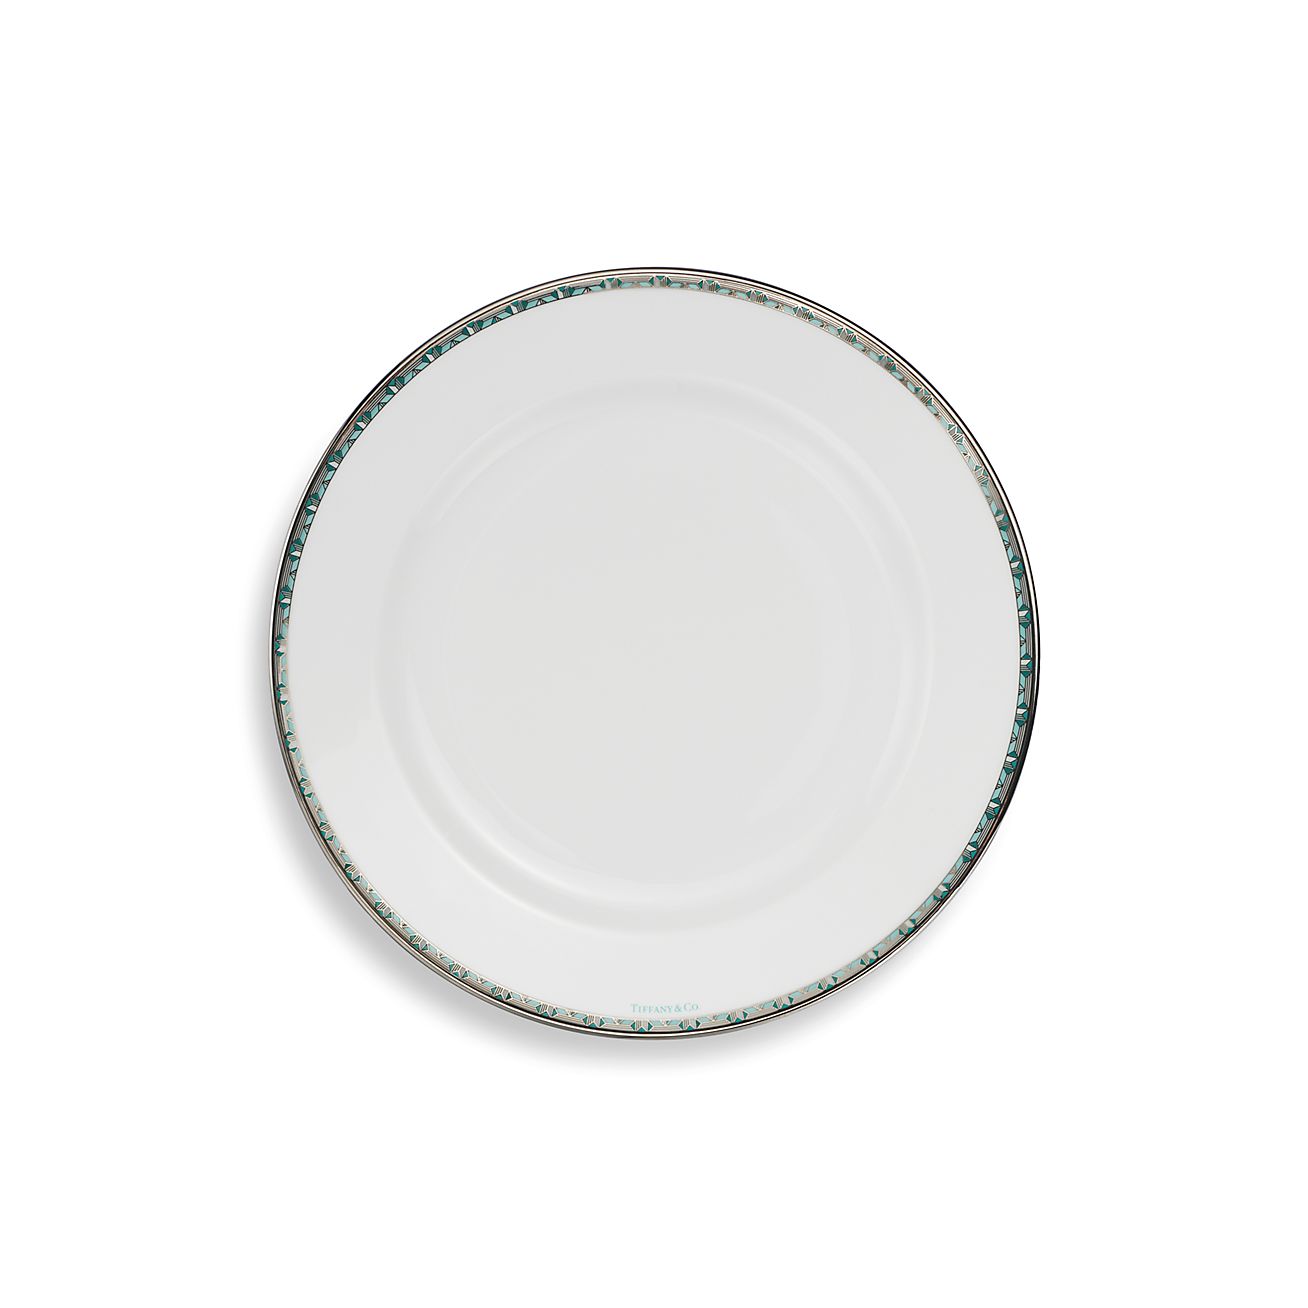 Tiffany T True Dessert Plate with a Hand-painted Platinum Rim | Tiffany &  Co.